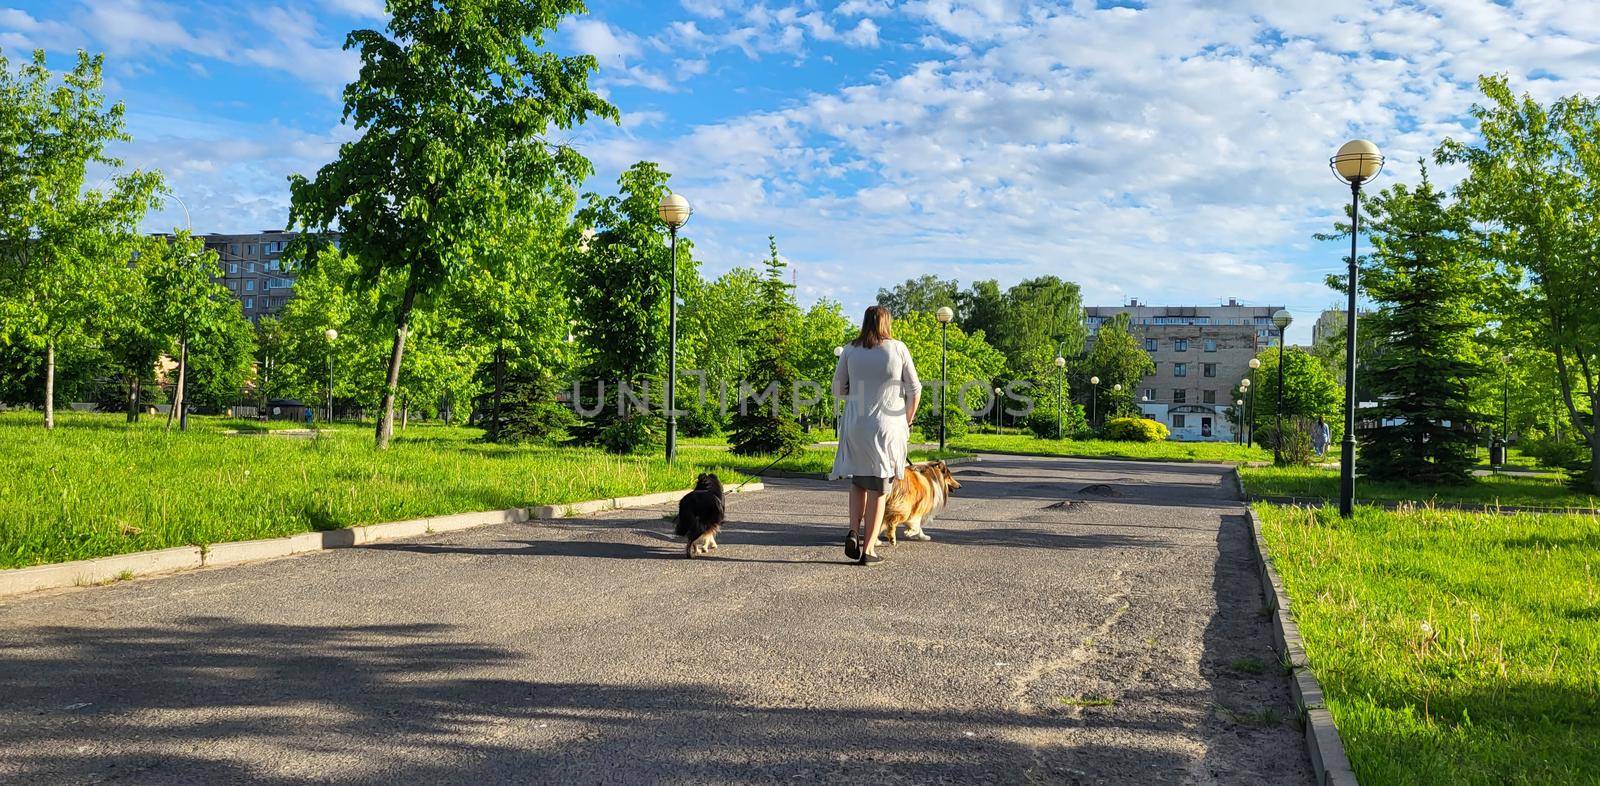 A woman walking with her dog on a leash, on the street, in the park on an asphalt path. by lapushka62